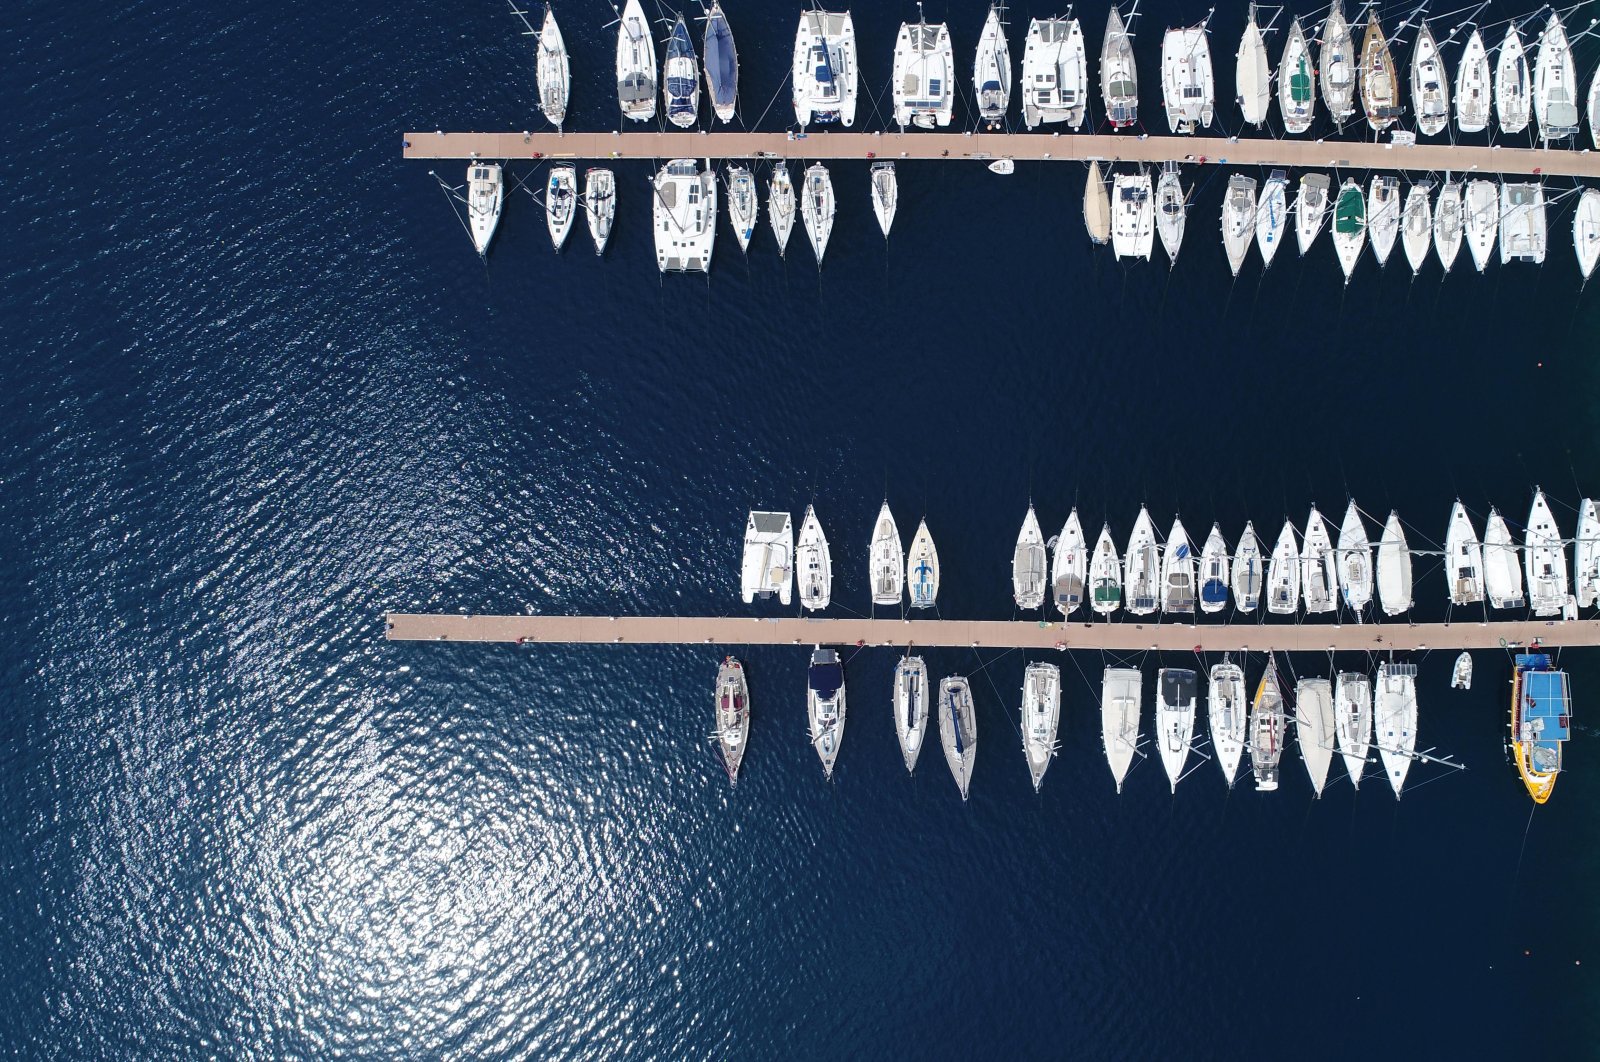 Yachts are seen at a port in Turkey's southern resort town of Kaş in Antalya province, April 21, 2020. (DHA Photo)